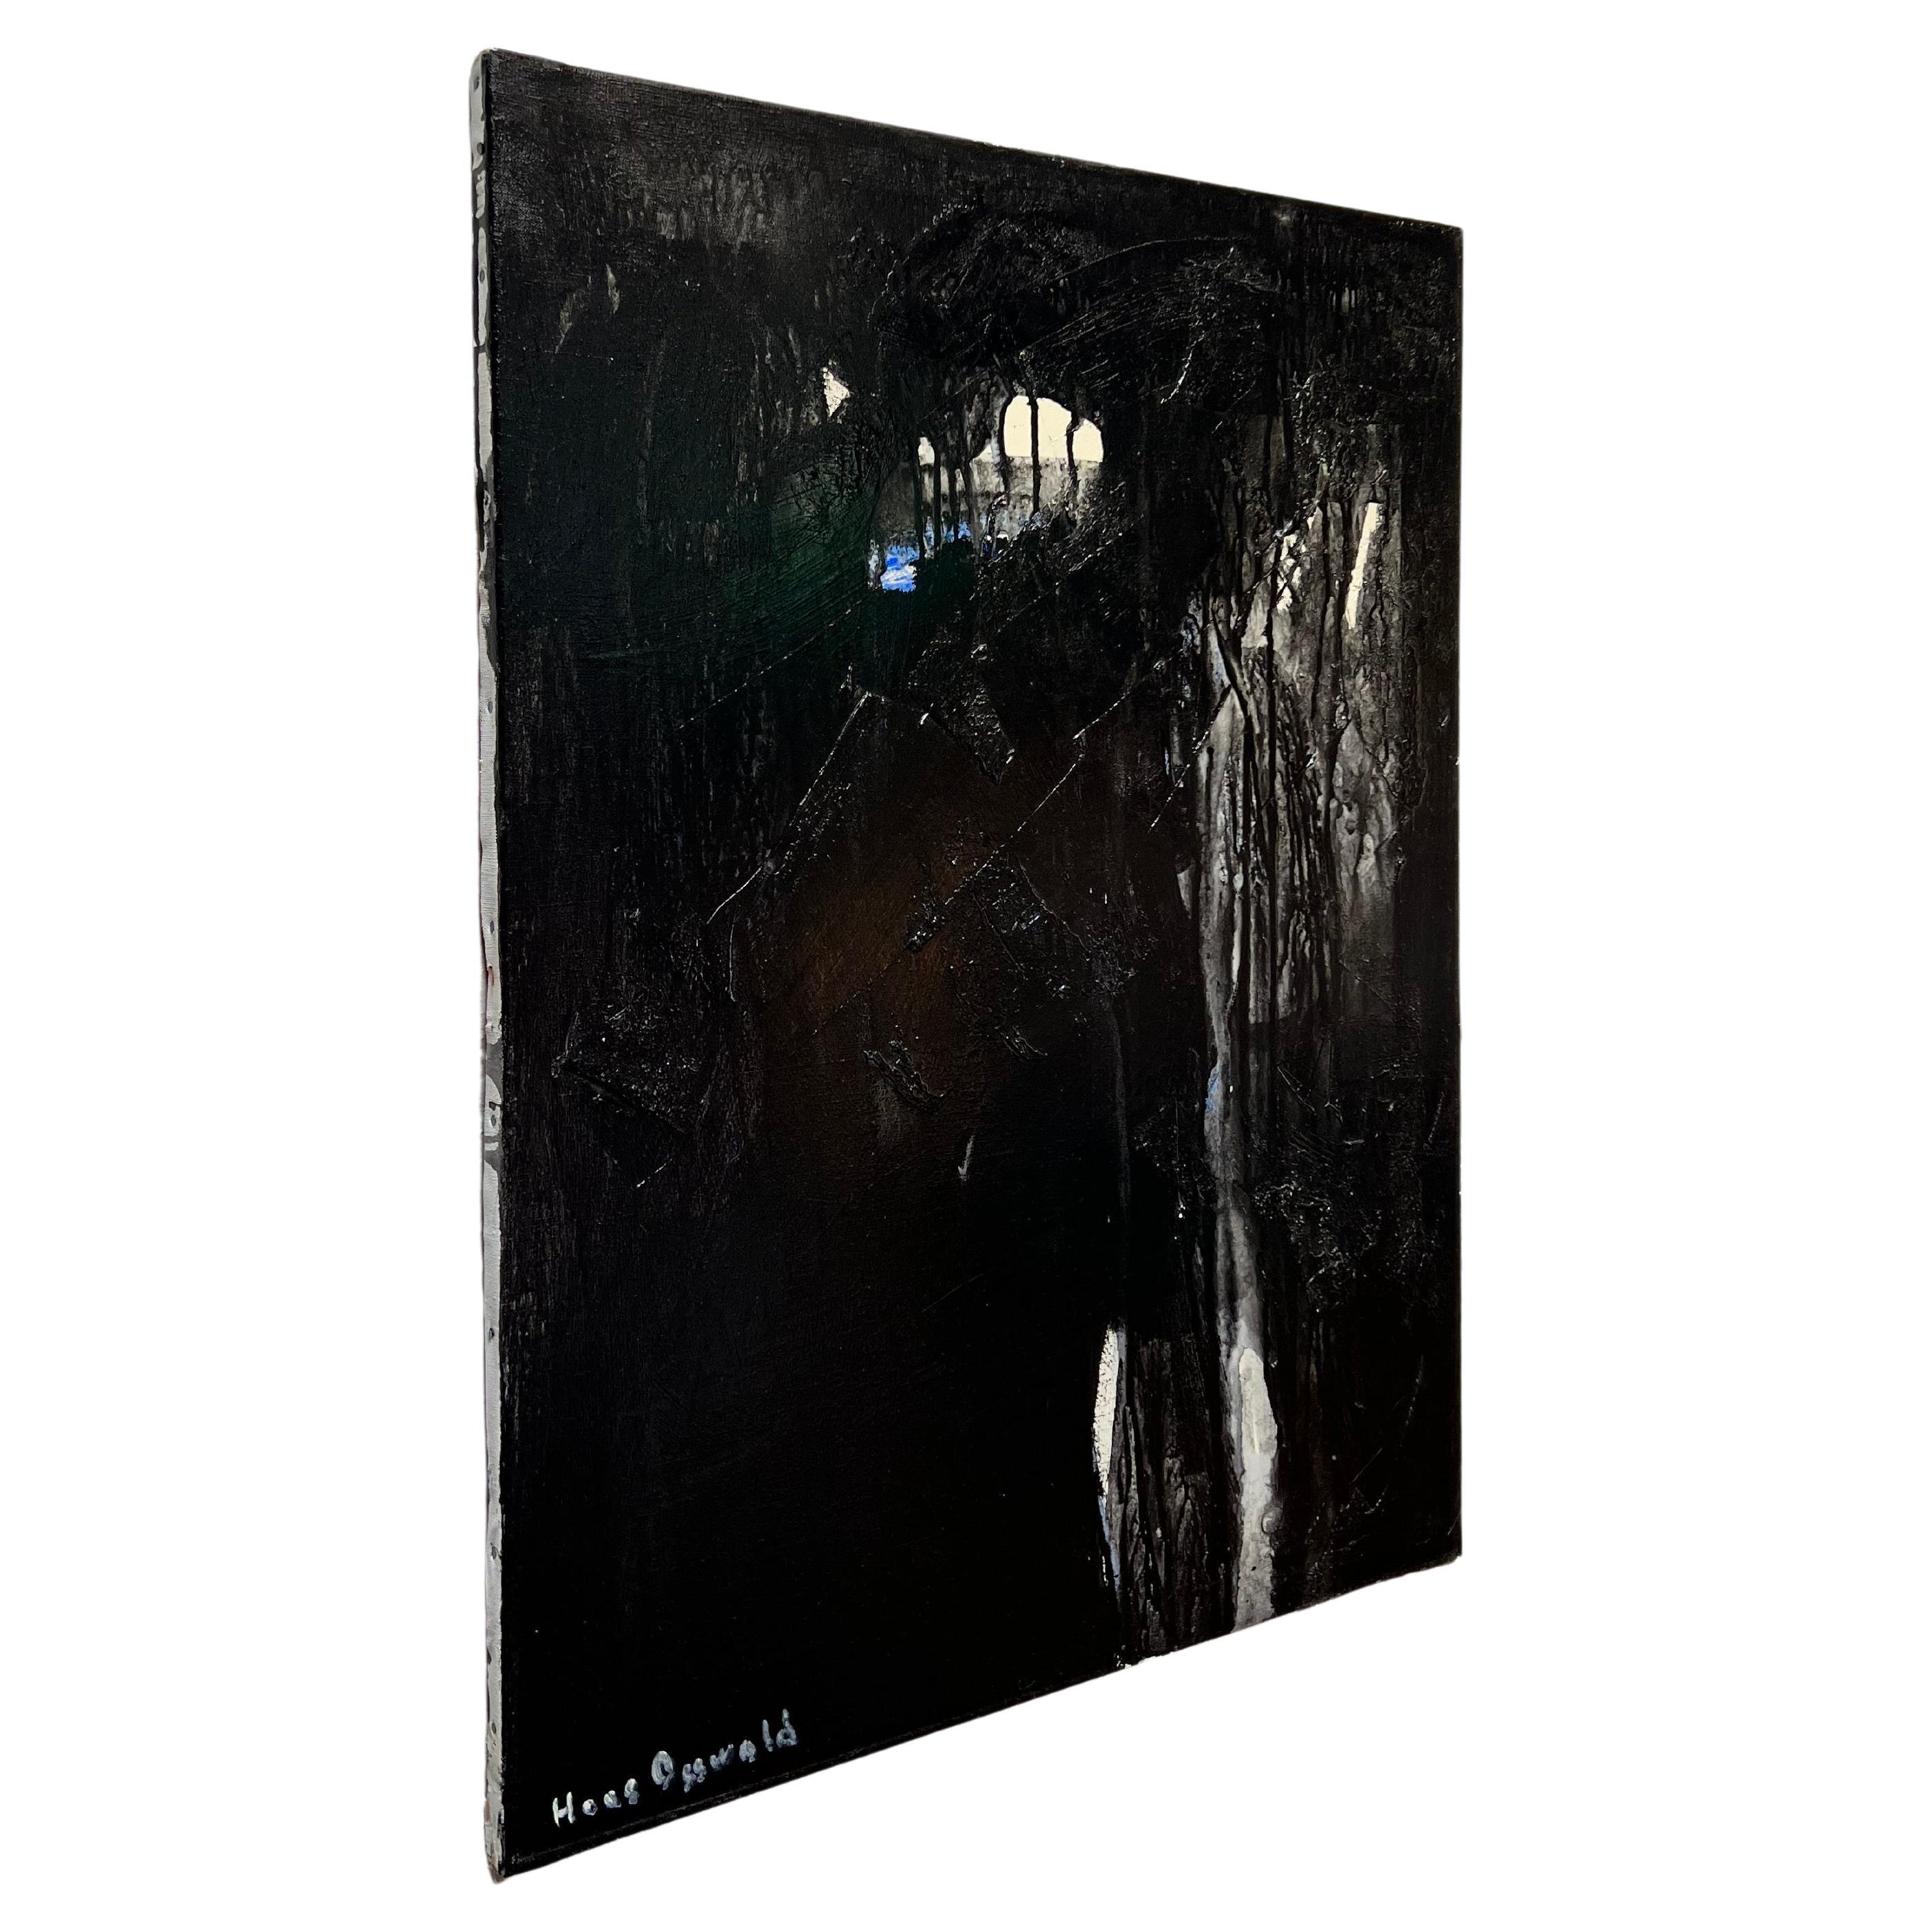 Black Oil on Canvas in the Style of Pierre Soulages by Hans Osswald 1960s For Sale